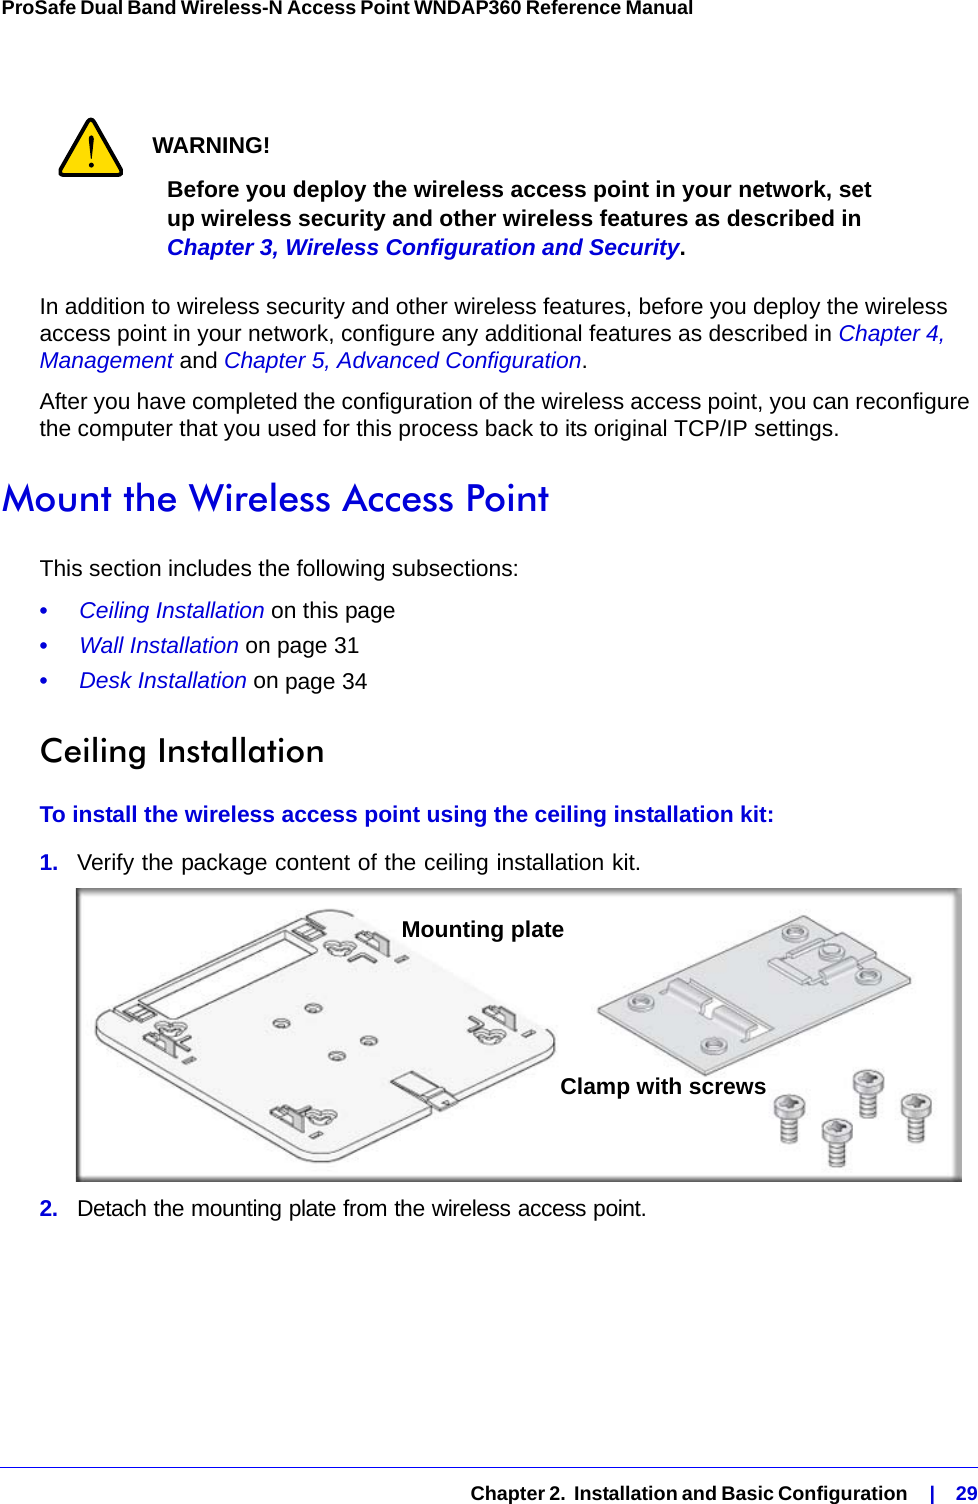   Chapter 2.  Installation and Basic Configuration    |    29ProSafe Dual Band Wireless-N Access Point WNDAP360 Reference Manual WARNING!Before you deploy the wireless access point in your network, set up wireless security and other wireless features as described in Chapter 3, Wireless Configuration and Security.In addition to wireless security and other wireless features, before you deploy the wireless access point in your network, configure any additional features as described in Chapter 4, Management and Chapter 5, Advanced Configuration.After you have completed the configuration of the wireless access point, you can reconfigure the computer that you used for this process back to its original TCP/IP settings.Mount the Wireless Access PointThis section includes the following subsections:•     Ceiling Installation on this page•     Wall Installation on page 31•     Desk Installation on page 34Ceiling InstallationTo install the wireless access point using the ceiling installation kit:1.  Verify the package content of the ceiling installation kit.2.  Detach the mounting plate from the wireless access point.Mounting plateClamp with screws